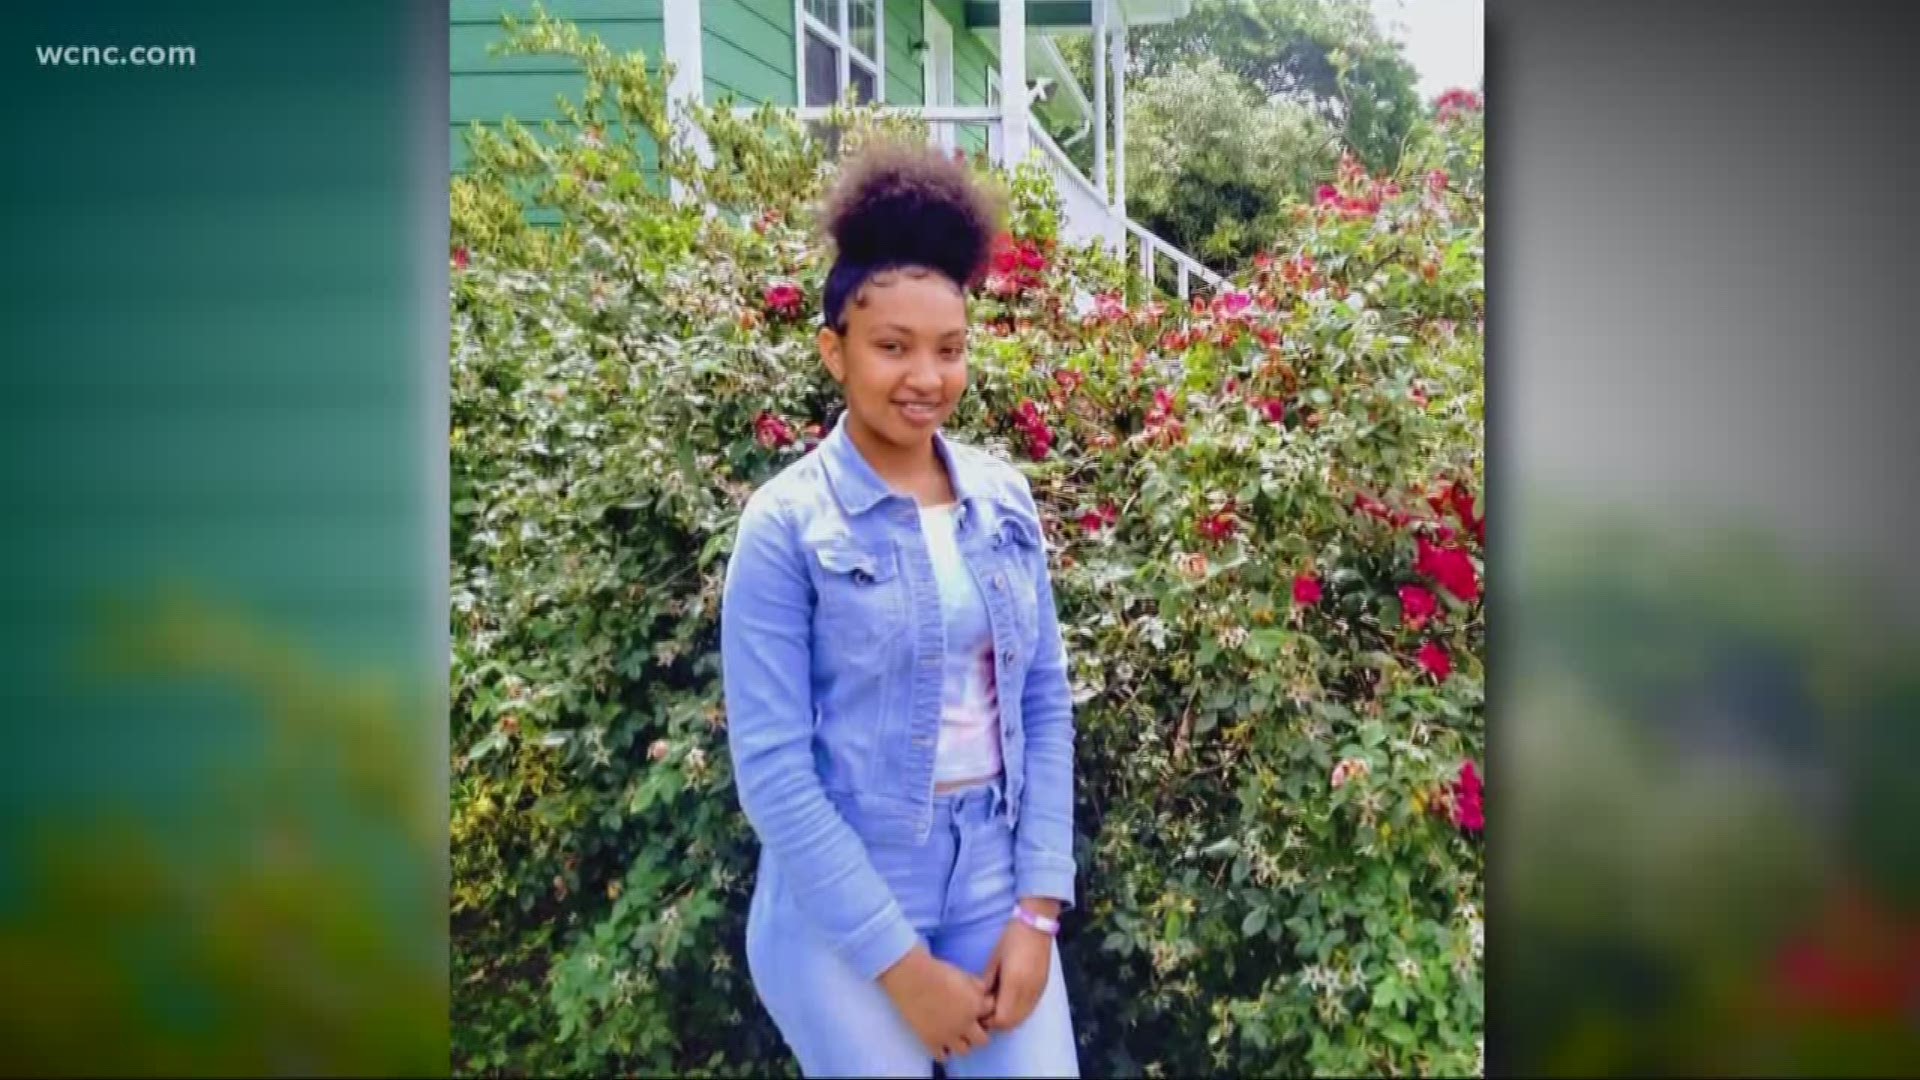 Zaria Burgess' funeral will be at the Christ Bible Discipleship Worship Center in Marshville. A public viewing will be held at 2 p.m. and a service at 3 p.m.